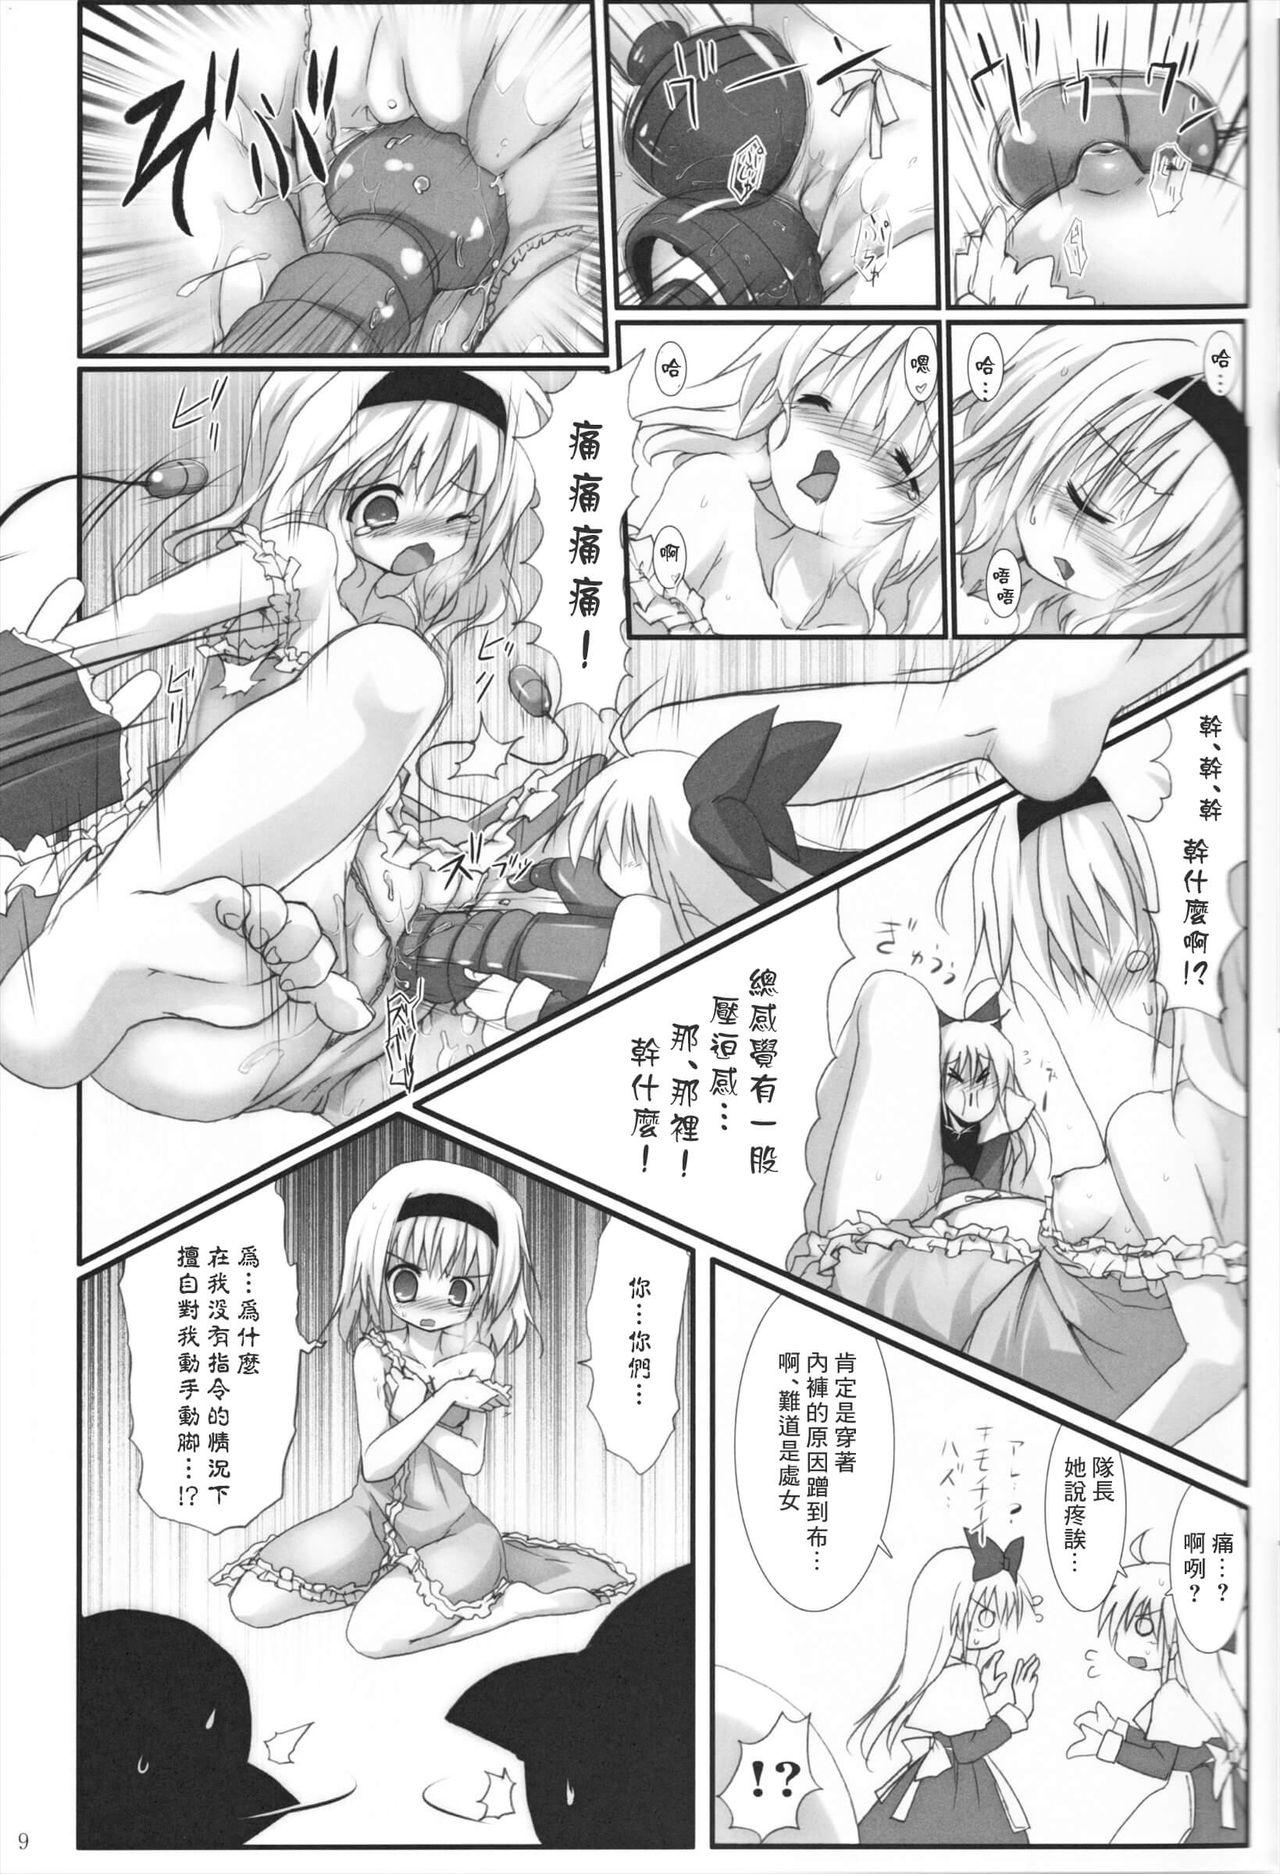 Collar Alice in Nightmare - Touhou project Corno - Page 10